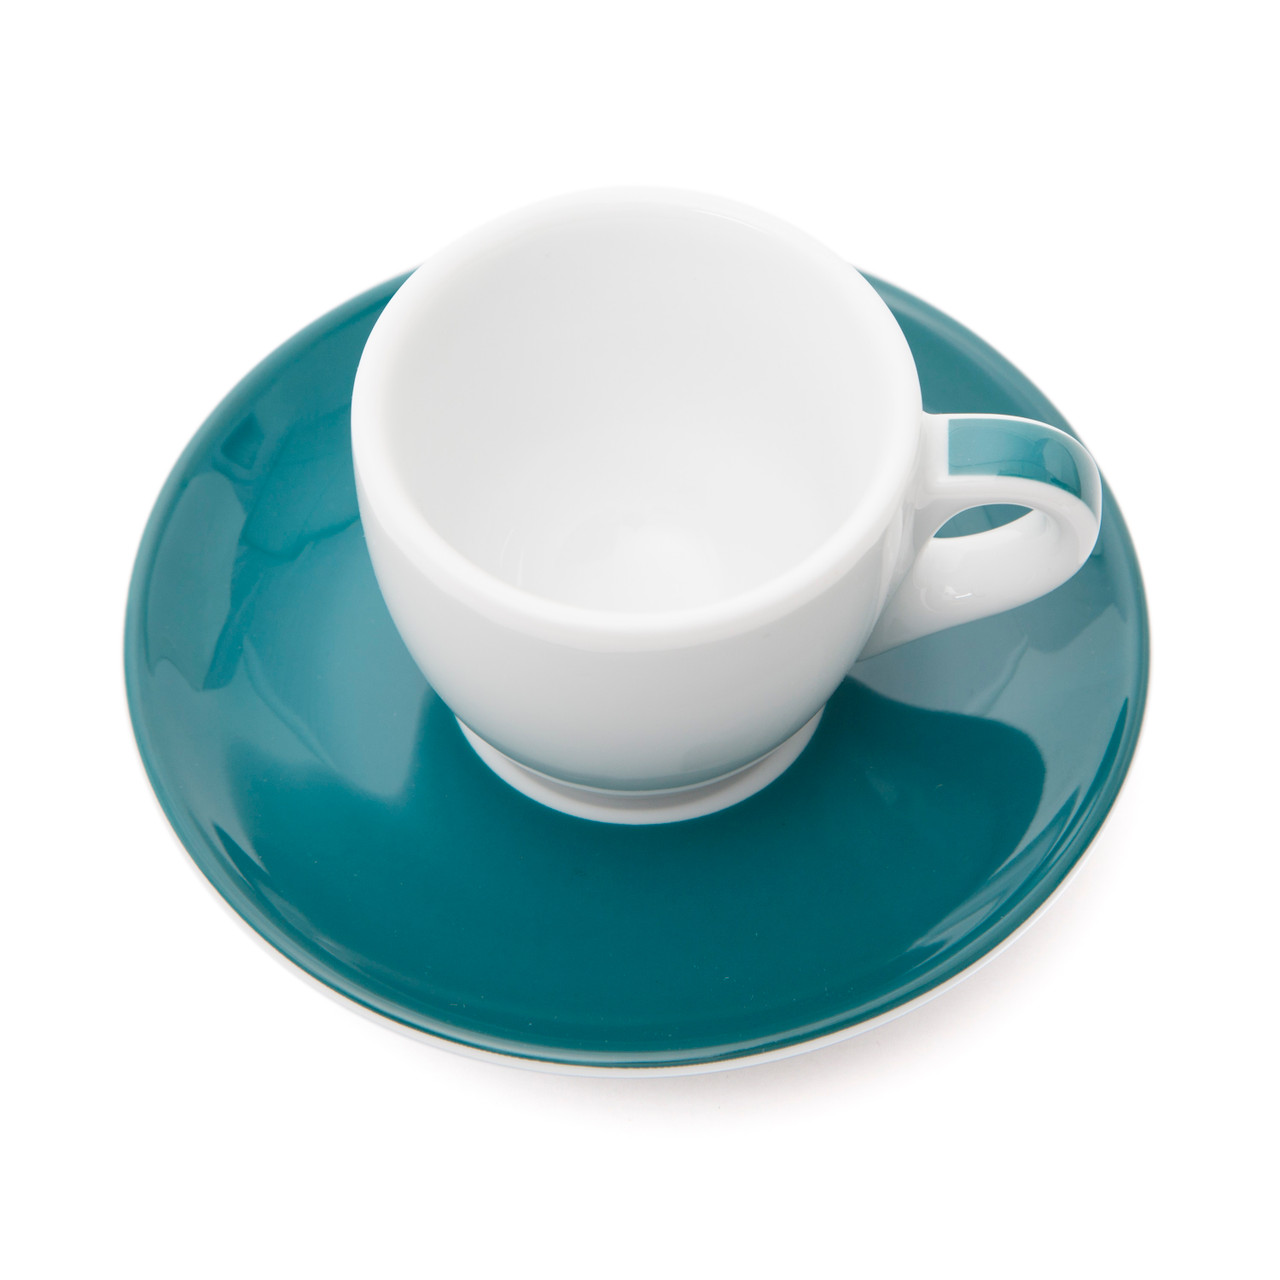 https://cdn11.bigcommerce.com/s-qnui5gocu2/images/stencil/1280x1280/products/249/1171/Angle-33009-Teal-Striped-Verona-Espresso-Cup-and-Saucer-2.5oz__89607.1597157771.jpg?c=1&imbypass=on